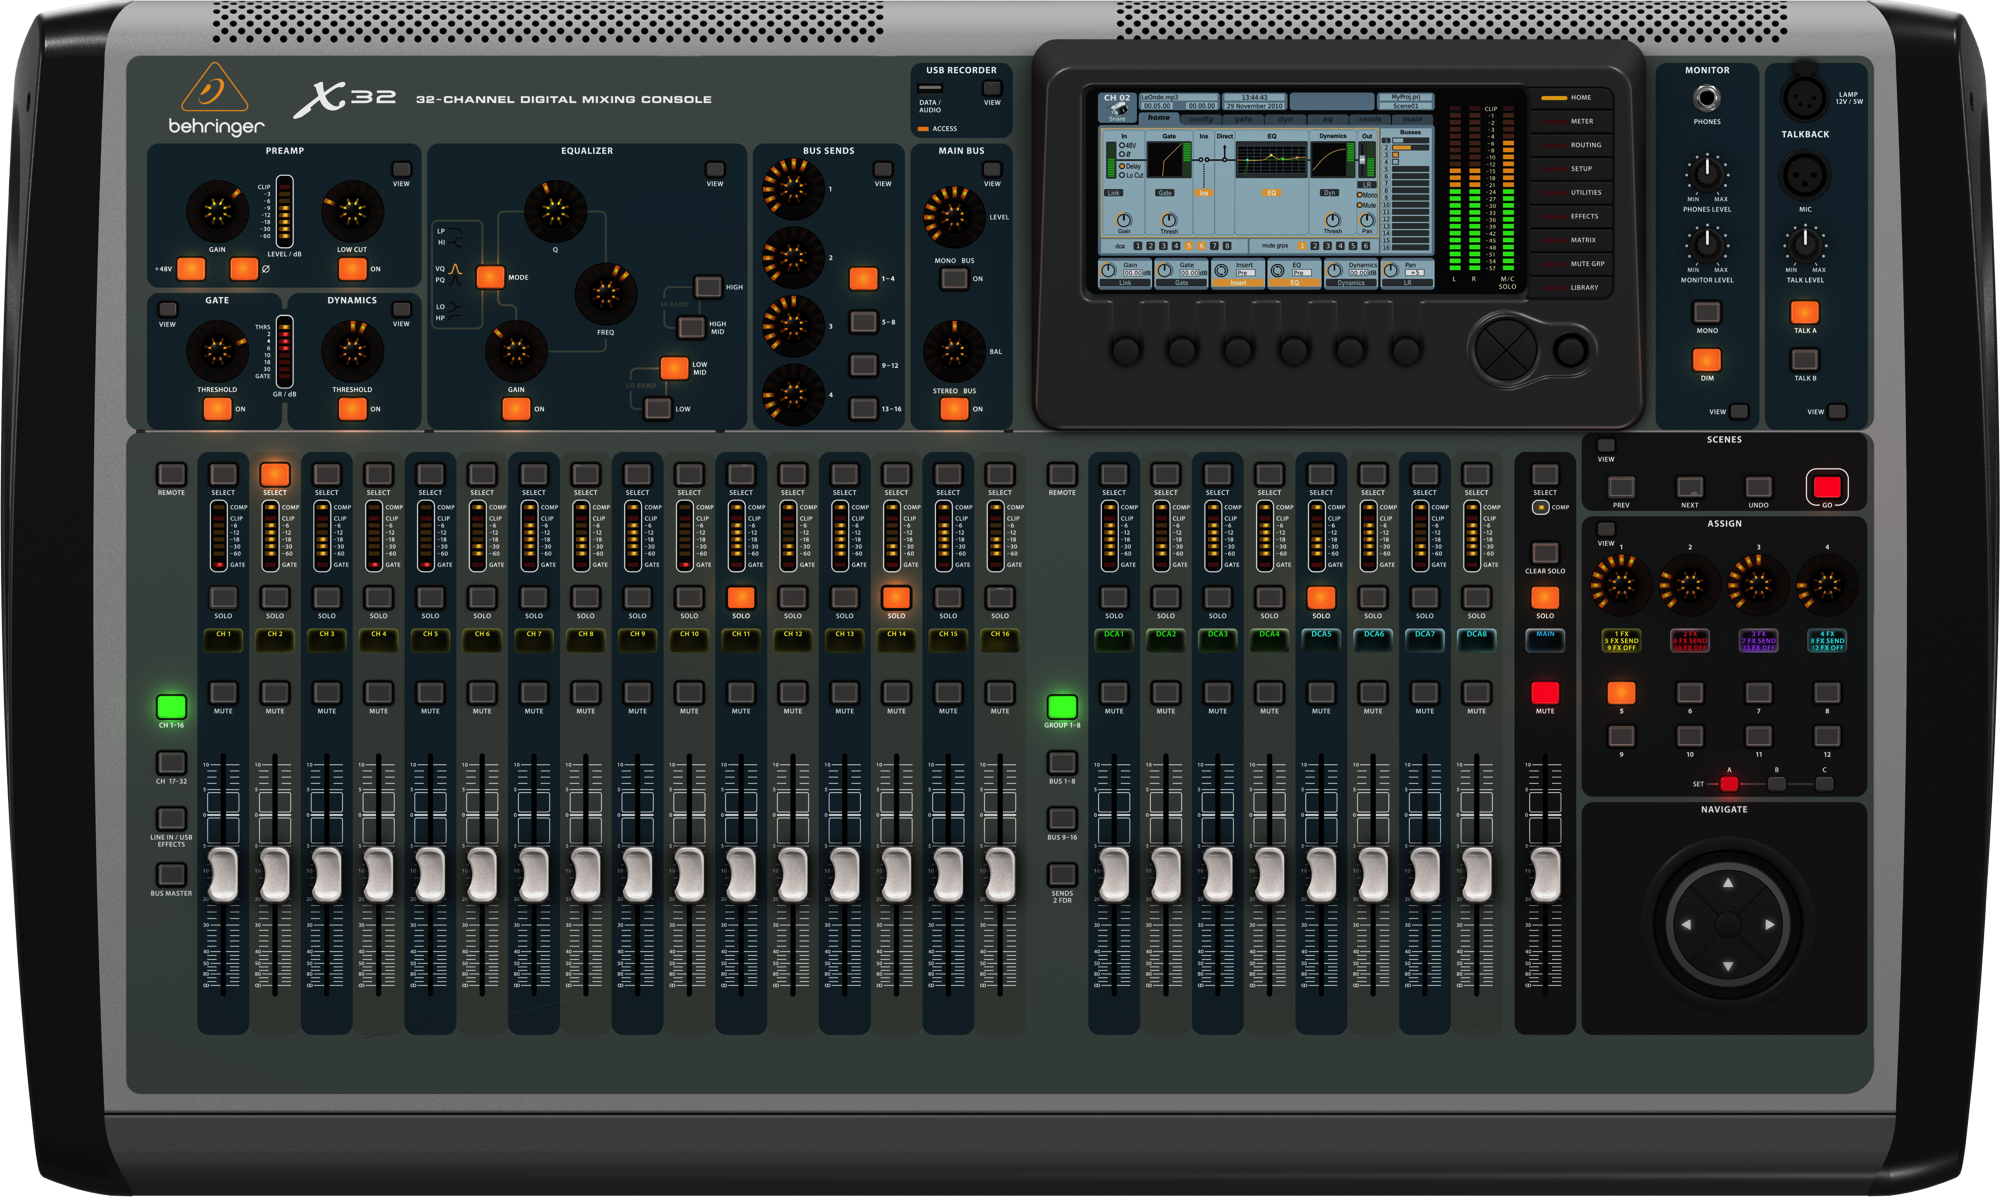 behringer-x32-digital-mixing-console-front.png